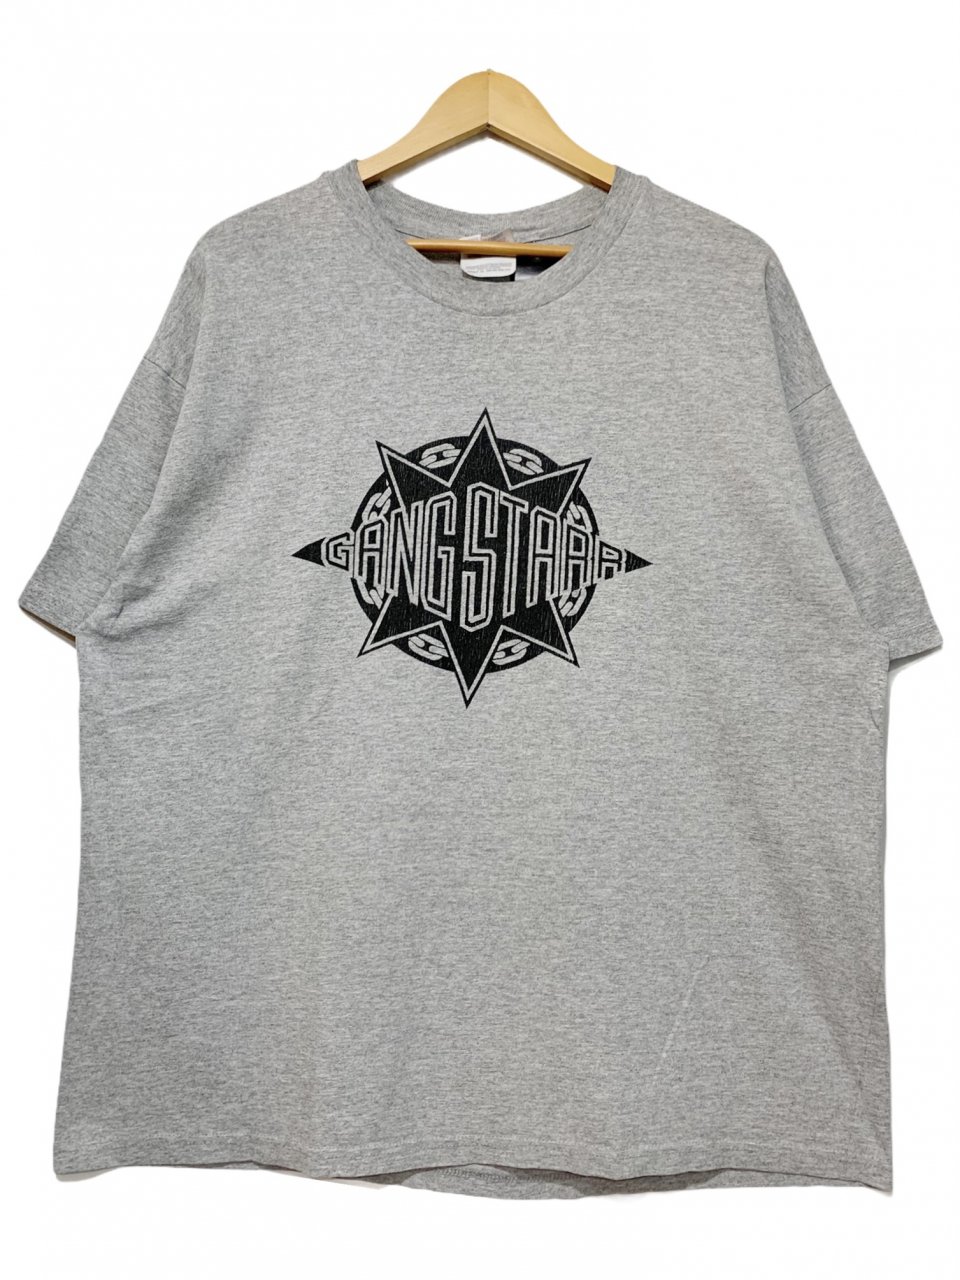 90s~00s GANG STARR S/S Tee 灰 XL ギャングスター 半袖 Tシャツ ロゴ